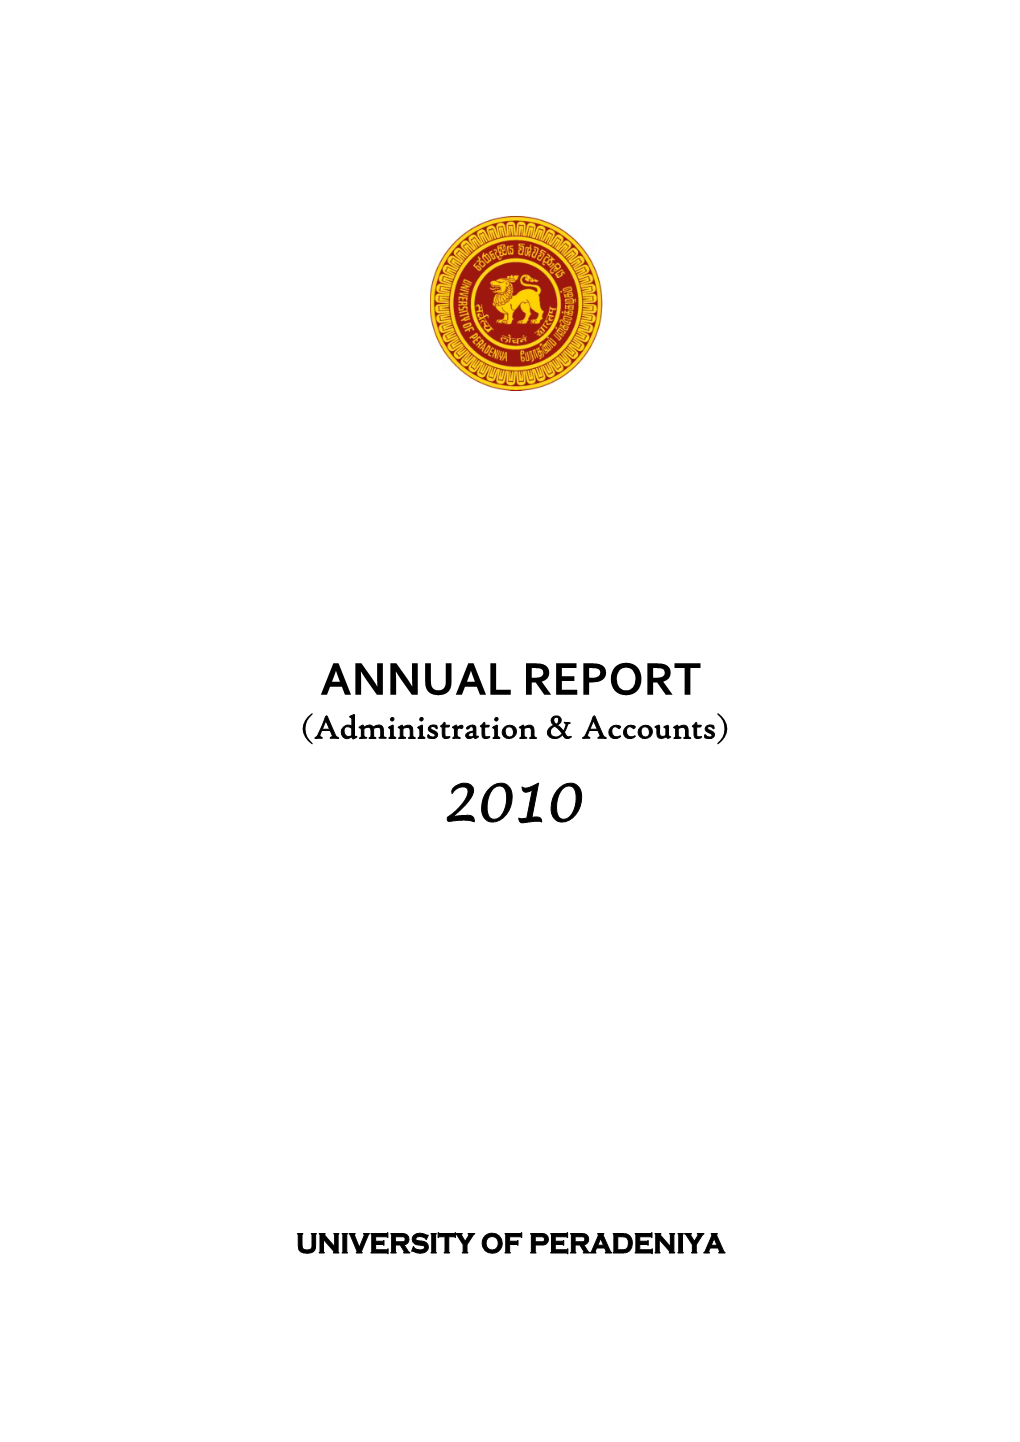 ANNUAL REPORT (Administration & Accounts)